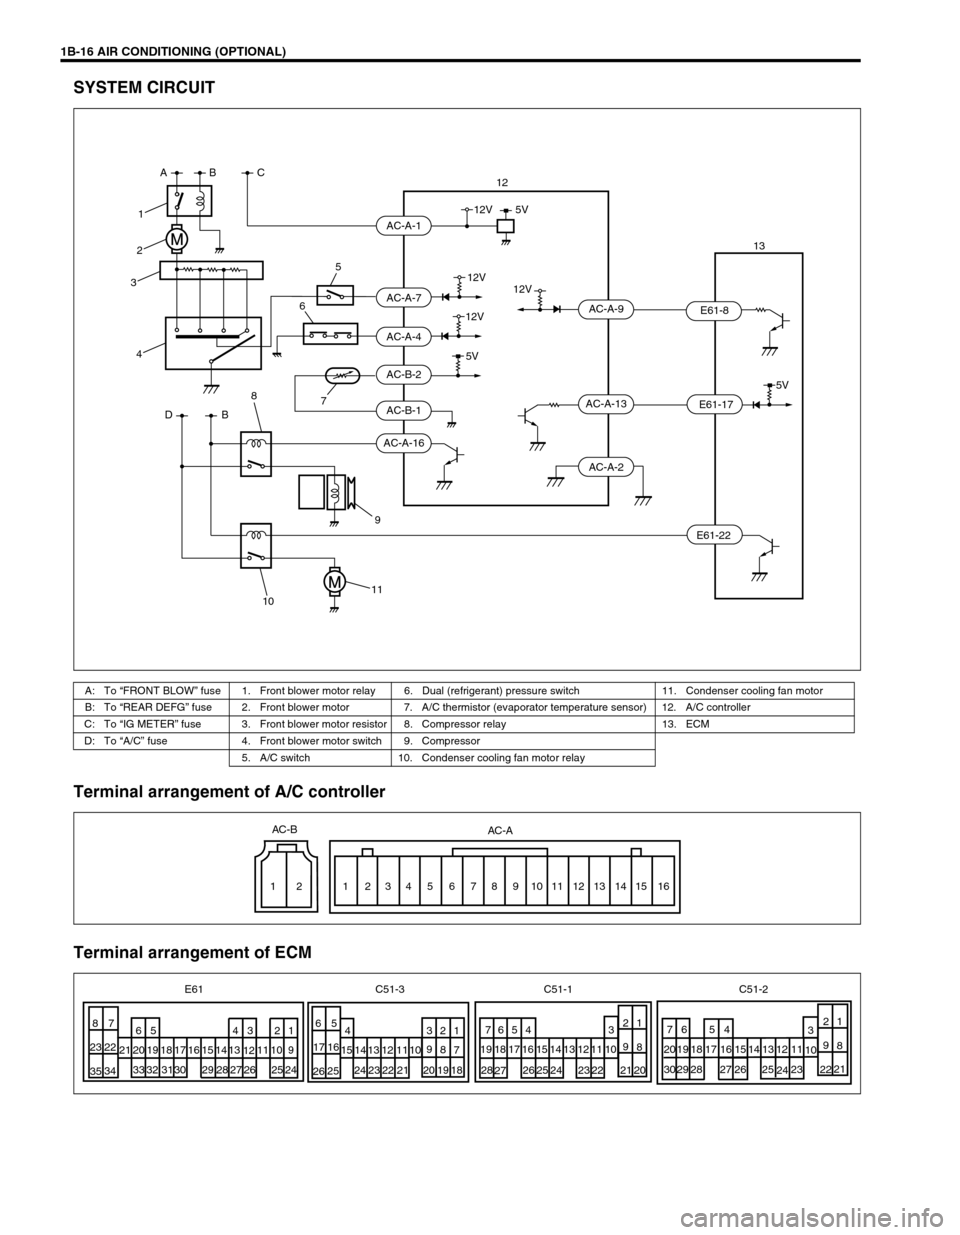 SUZUKI GRAND VITARA 2001 2.G Service Manual 1B-16 AIR CONDITIONING (OPTIONAL)
SYSTEM CIRCUIT
Terminal arrangement of A/C controller
Terminal arrangement of ECM
A: To “FRONT BLOW” fuse 1. Front blower motor relay 6. Dual (refrigerant) pressu